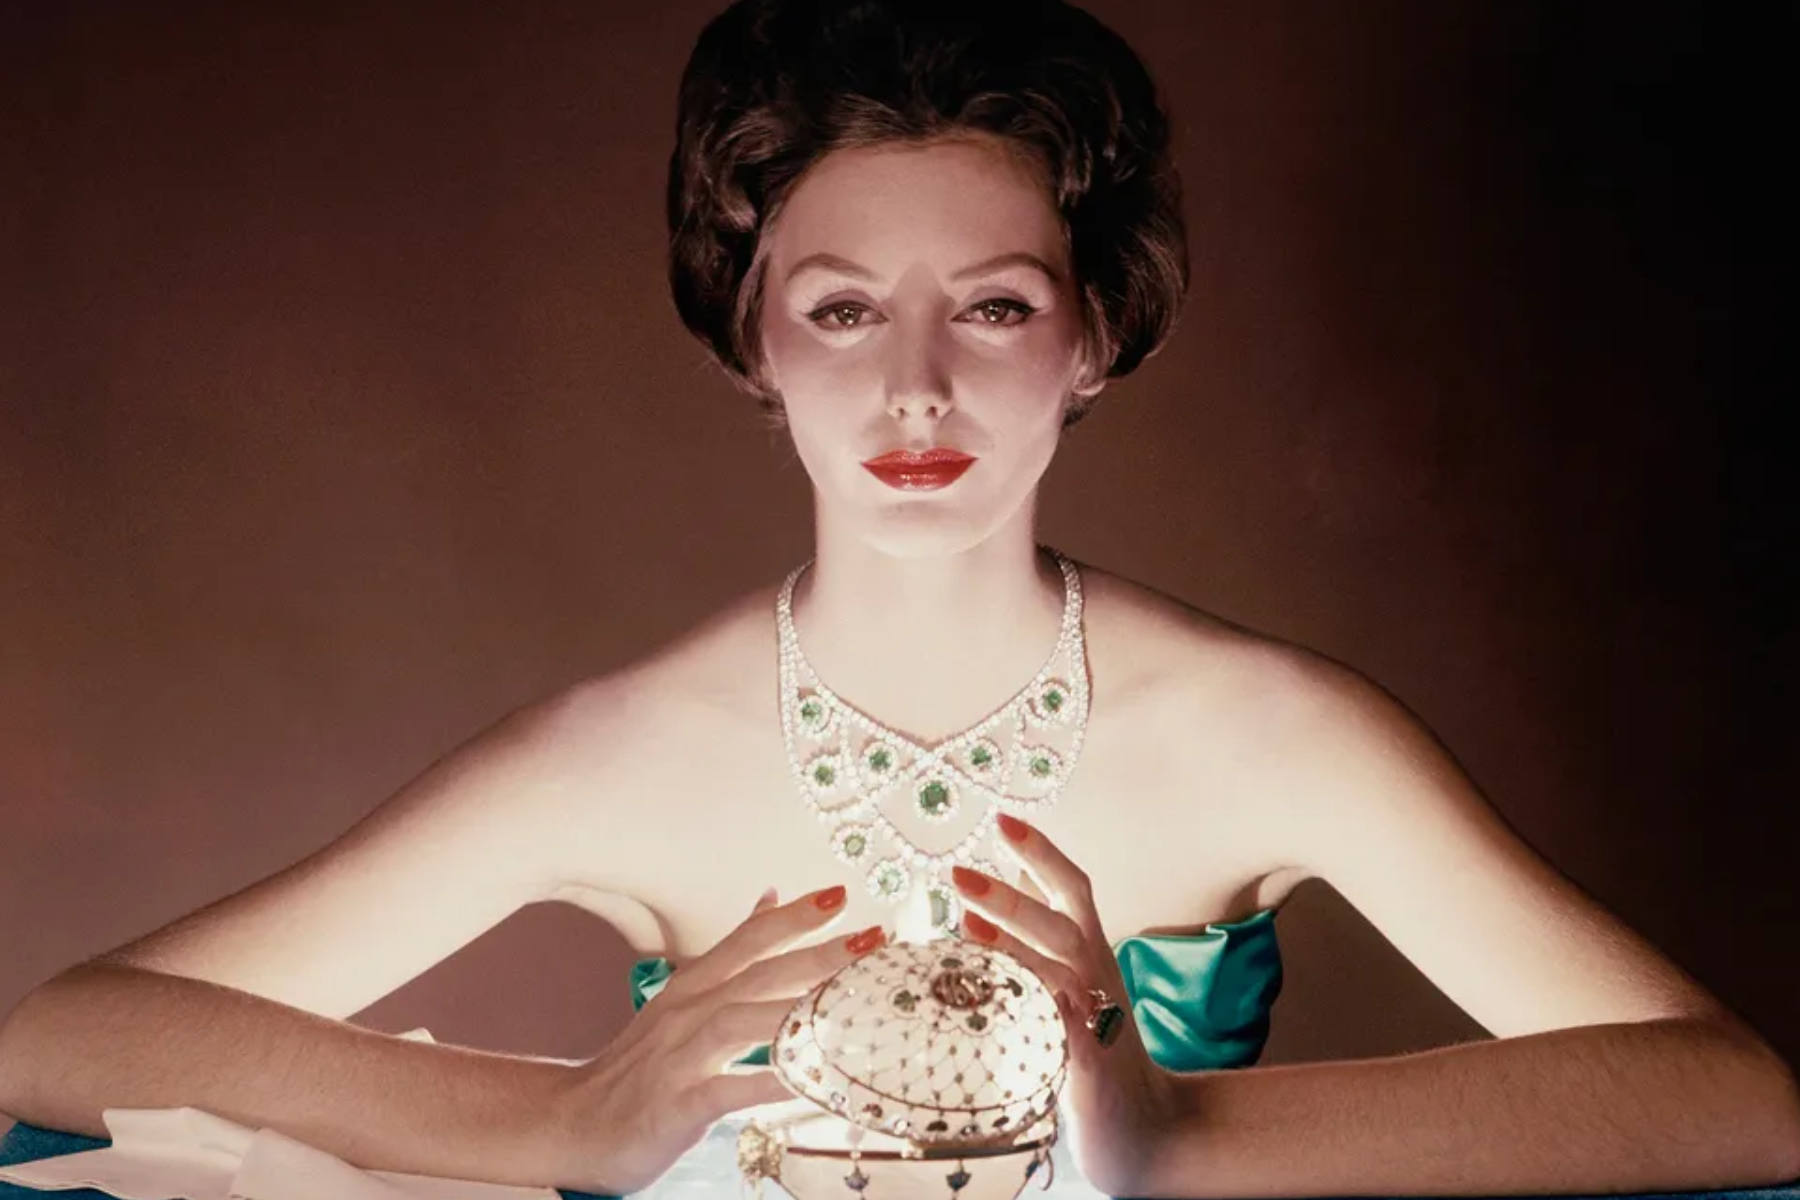 A woman wearing green jewelry and holding a jewelry treasure